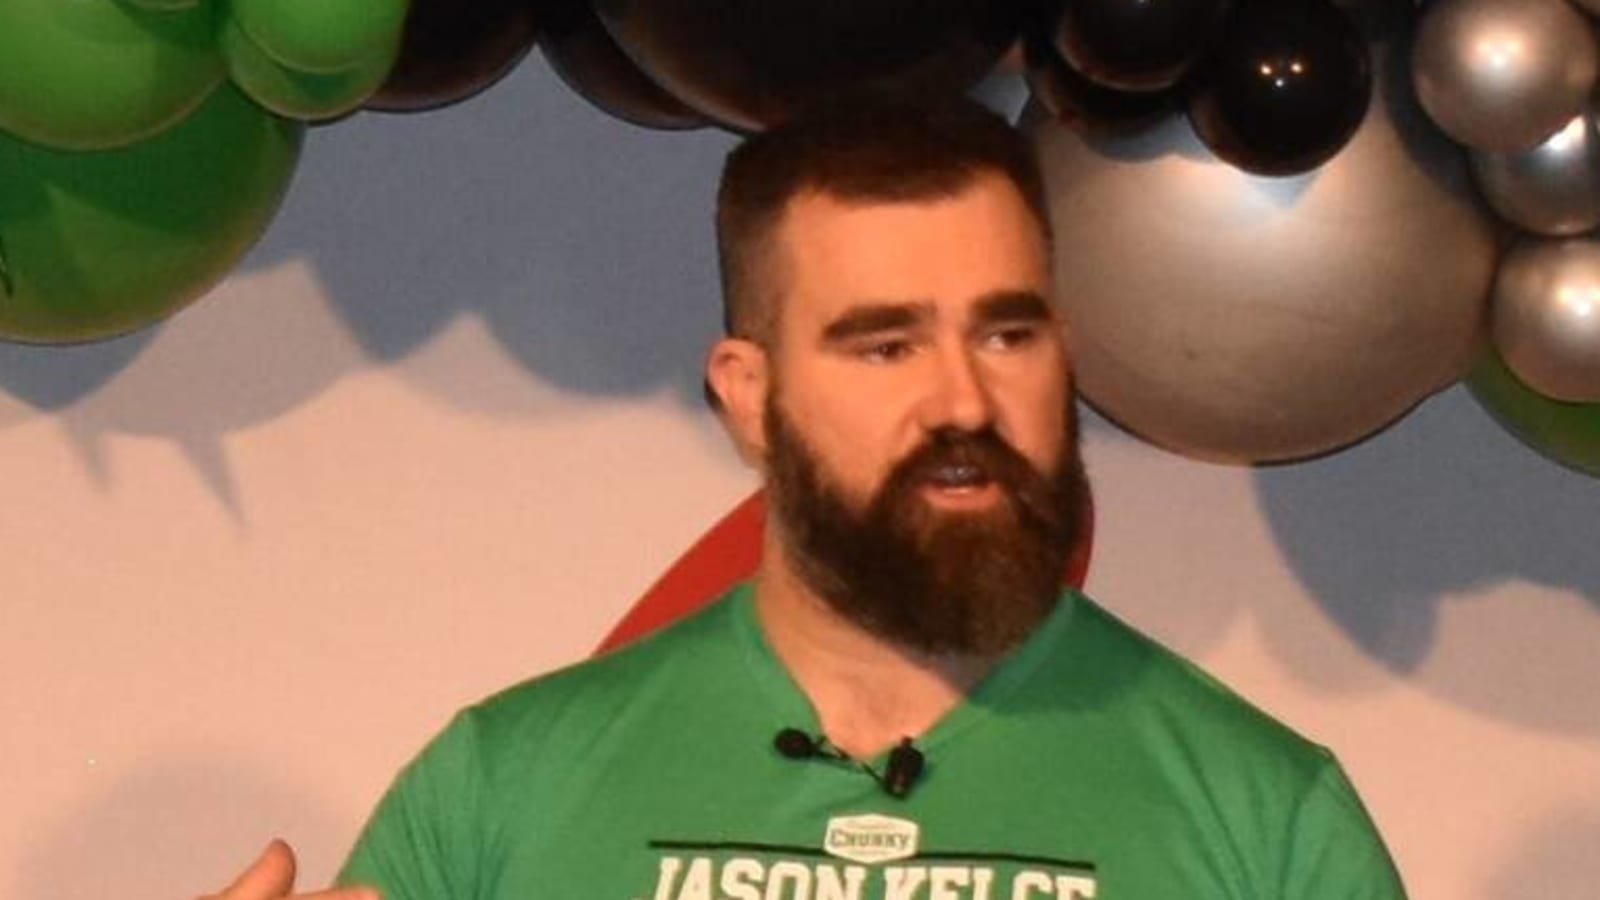 Could Jason Kelce make an appearance at WrestleMania XL?